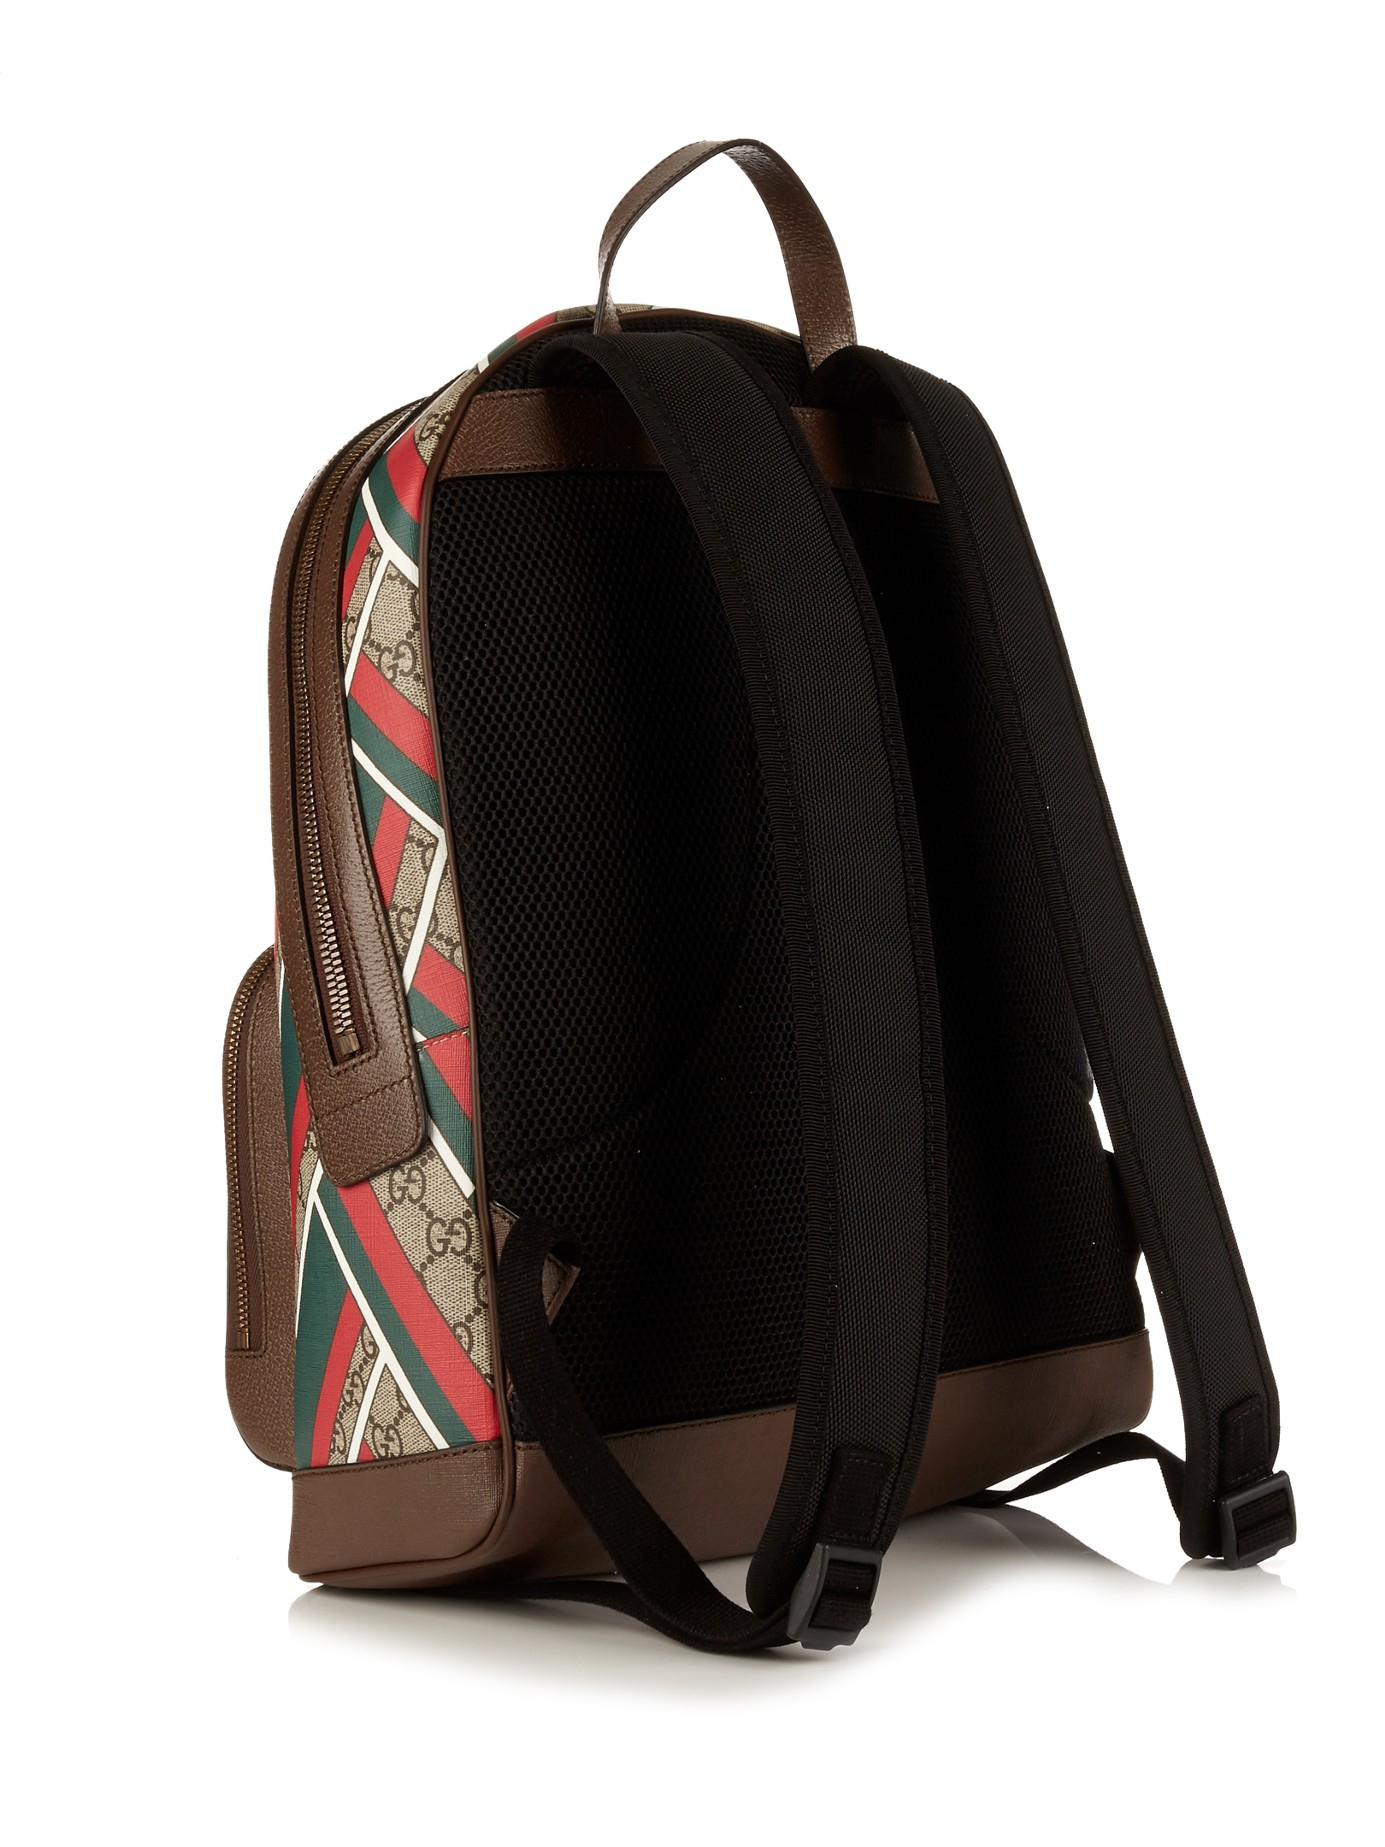 Lyst - Gucci GG Supreme Canvas Chevron-Print Backpack in Brown for Men